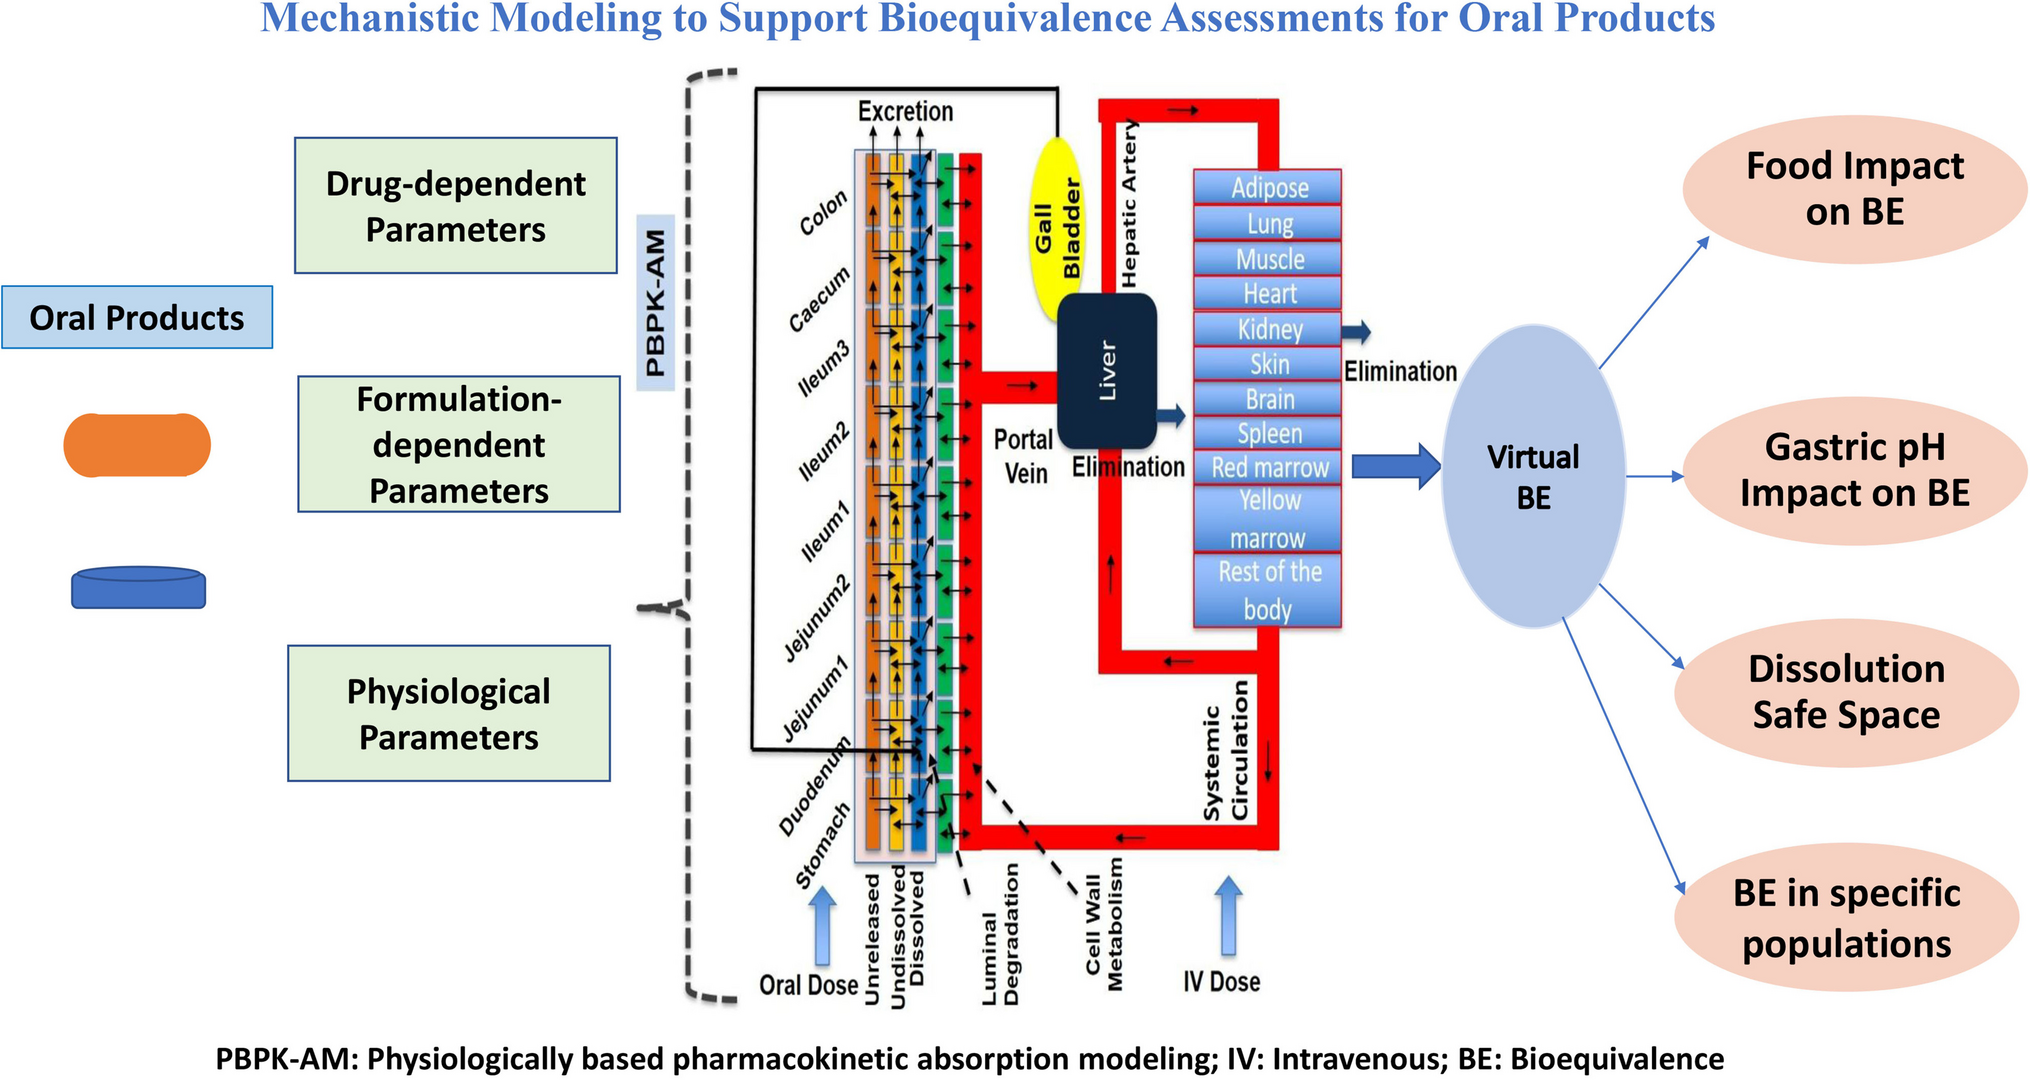 Using Mechanistic Modeling Approaches to Support Bioequivalence Assessments for Oral Products